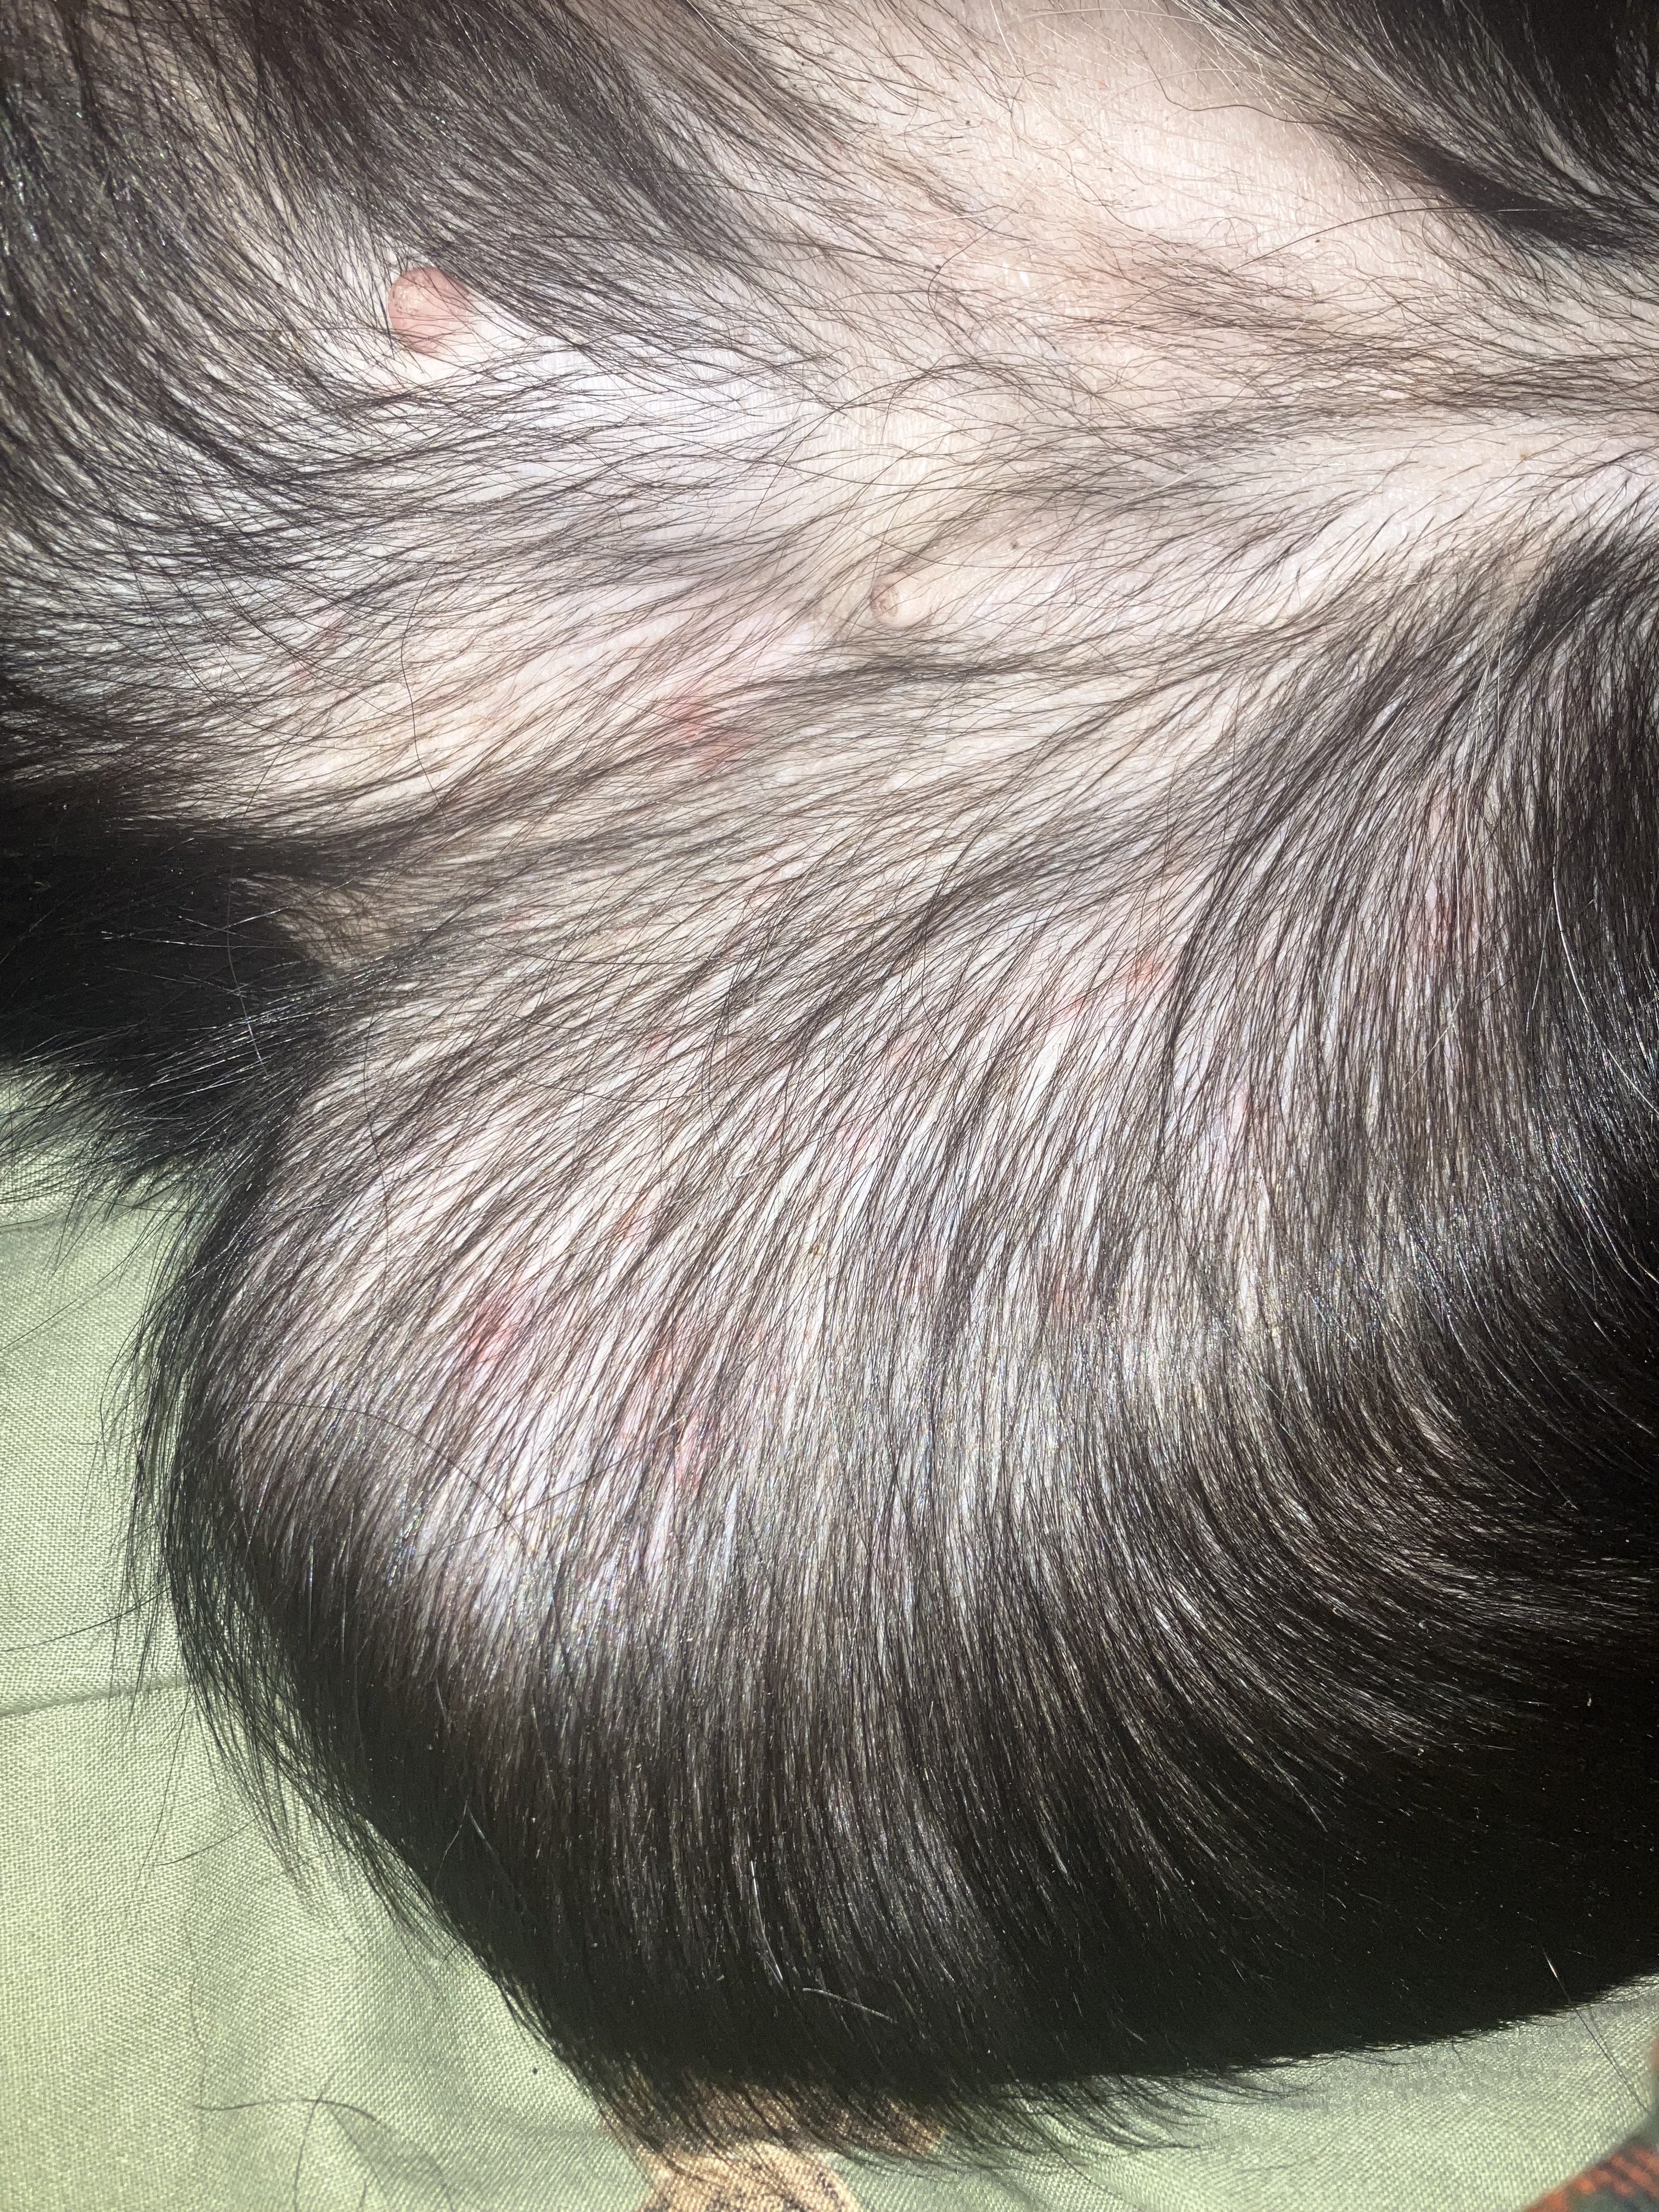 Dog itchiness and rash/spots in groin